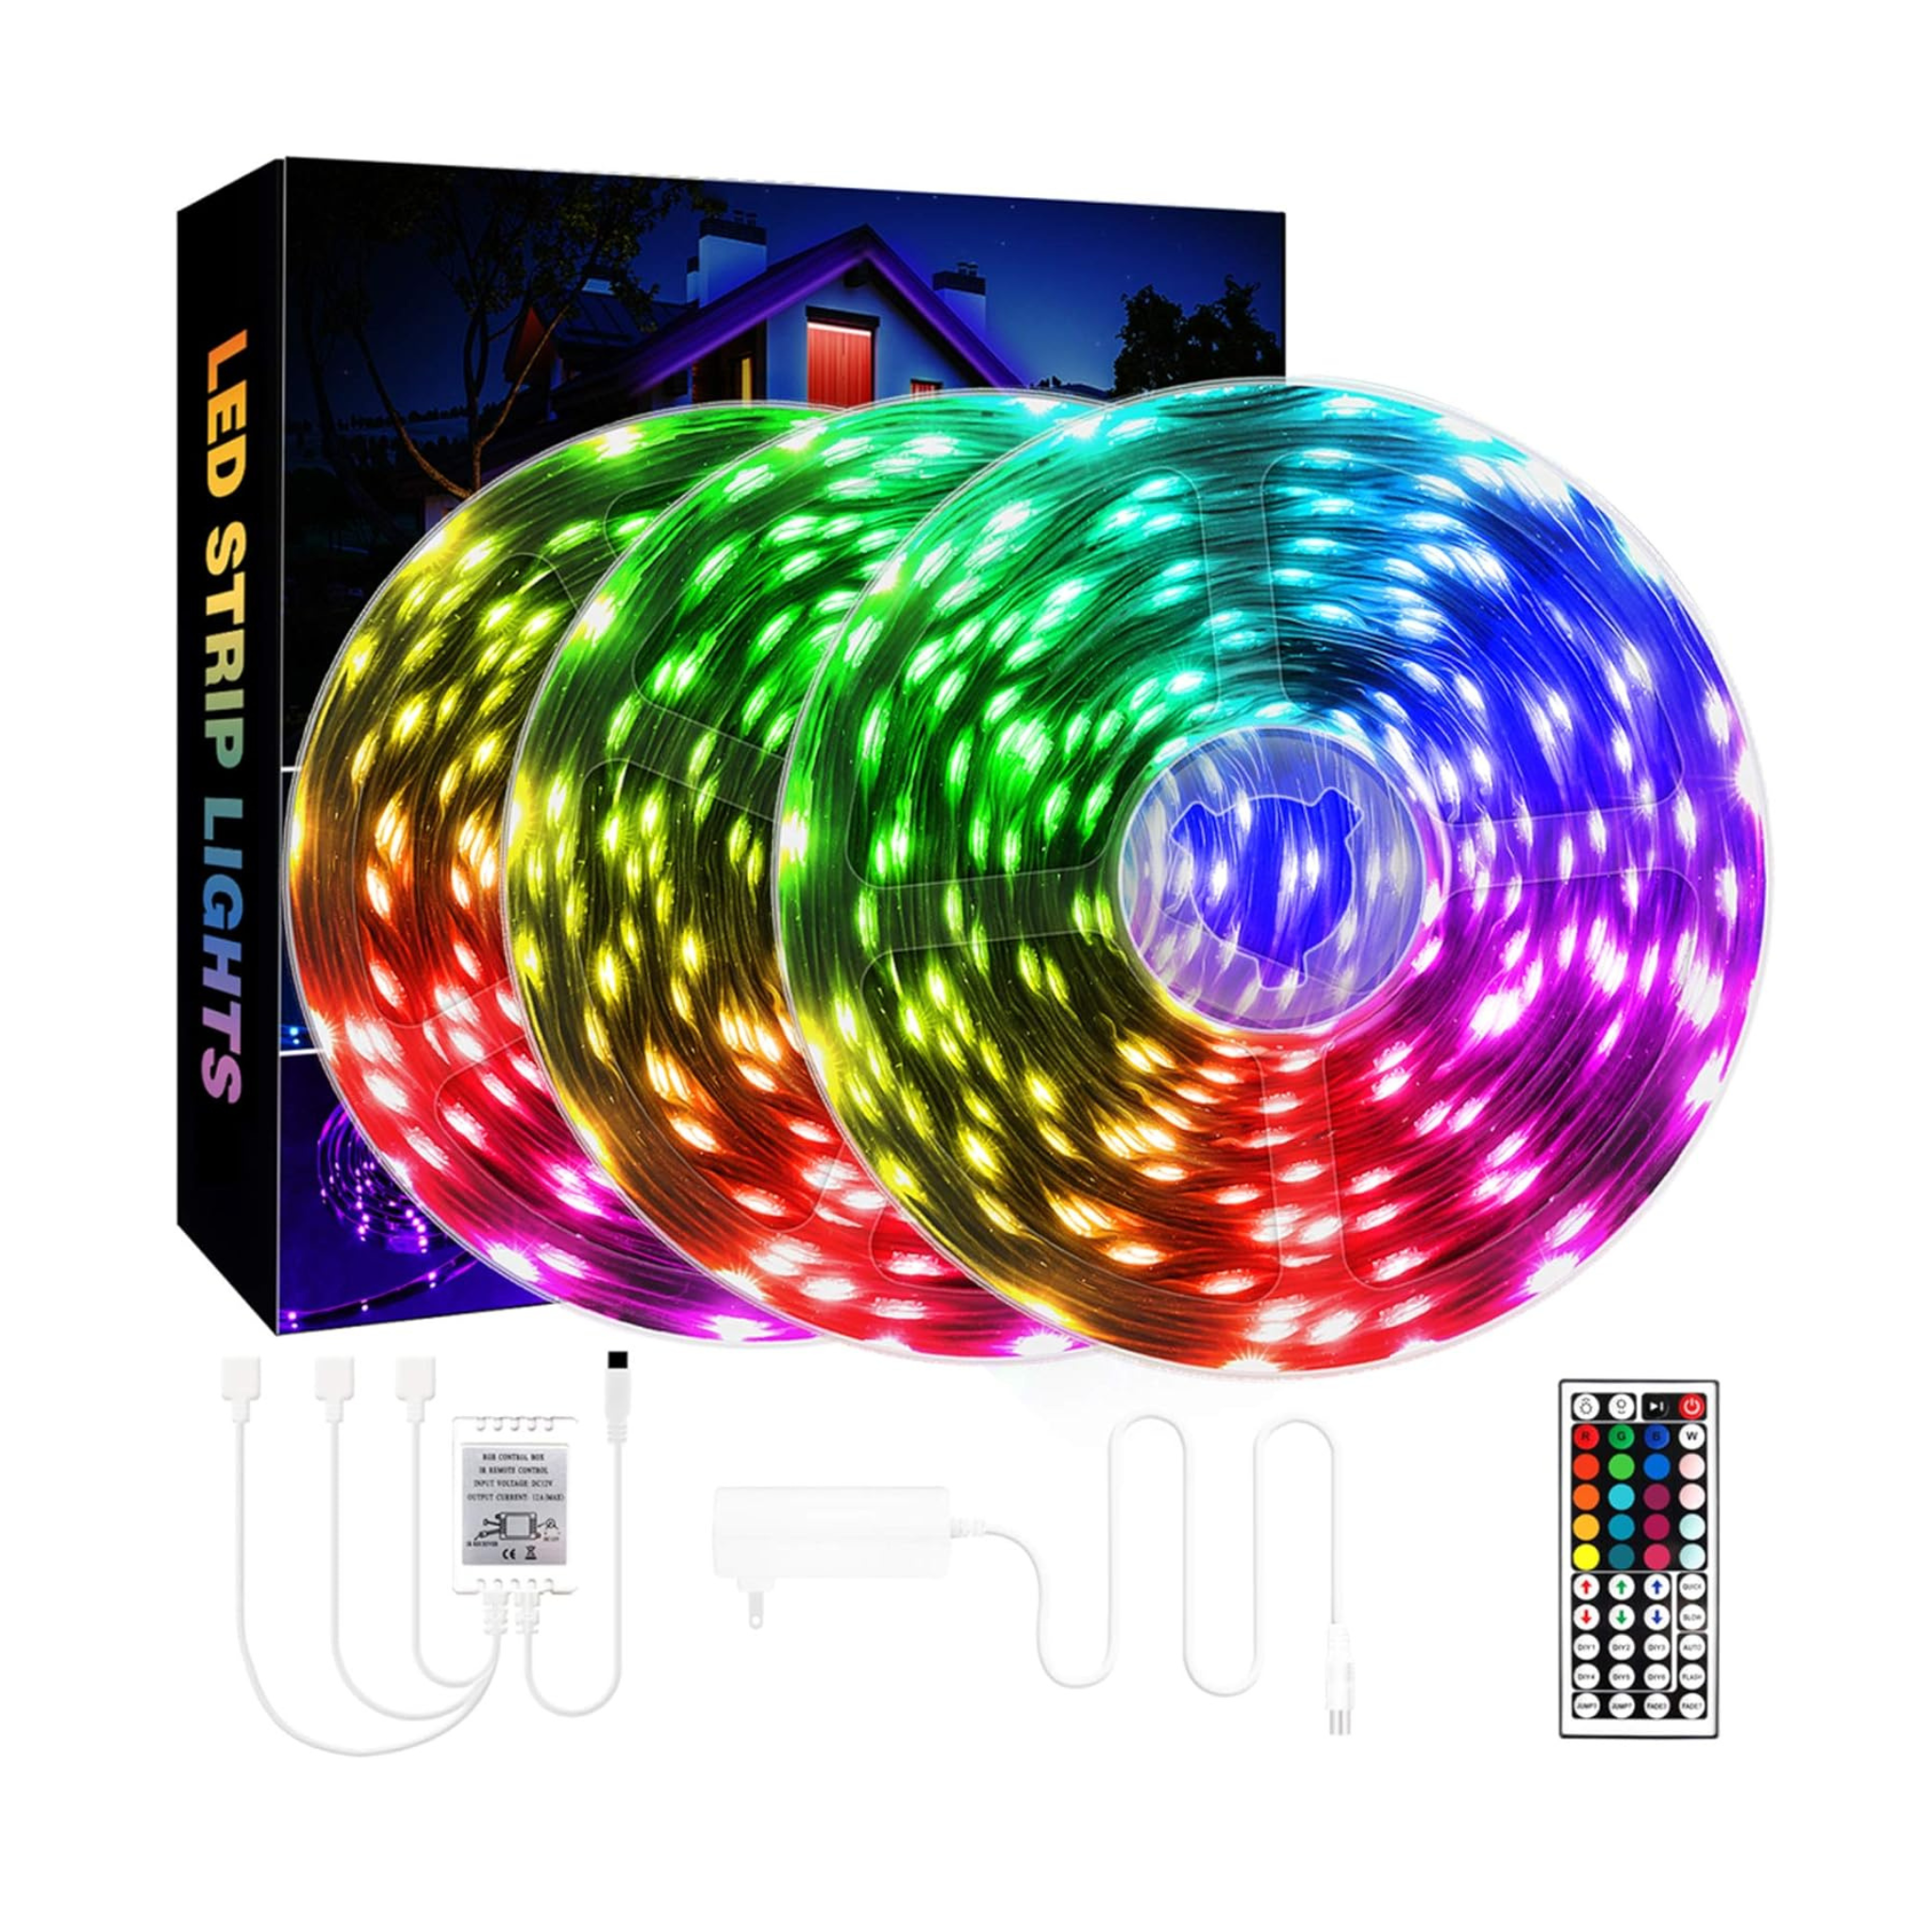 Qzyl 75ft RGB Color Changing Dimmable LED Strip Lights with Remote